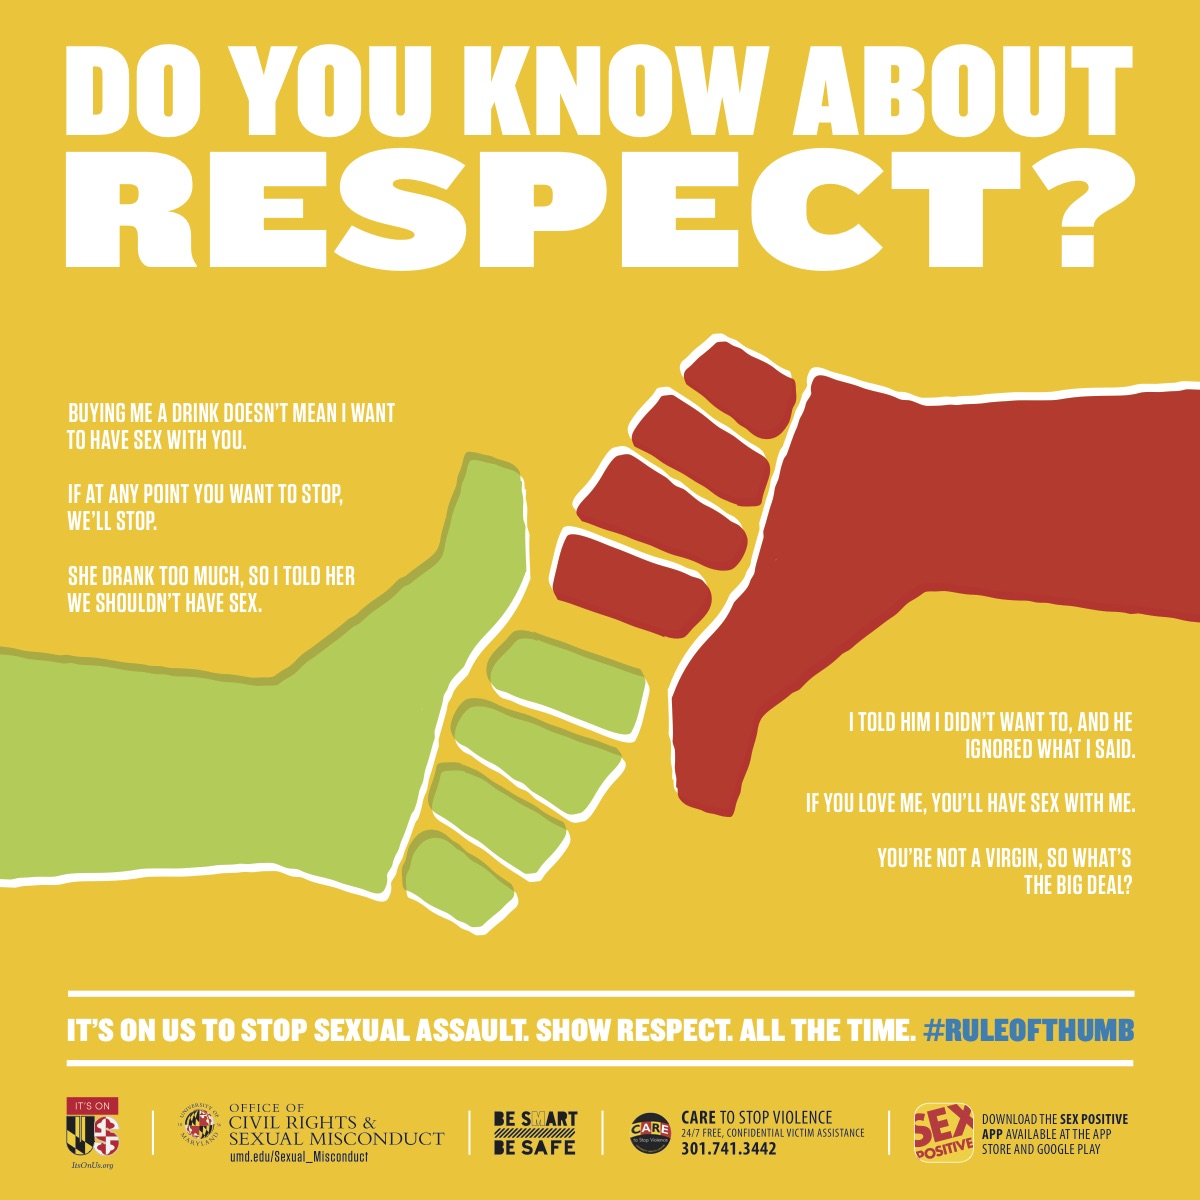 TDPS gives a Thumbs Up to RESPECT